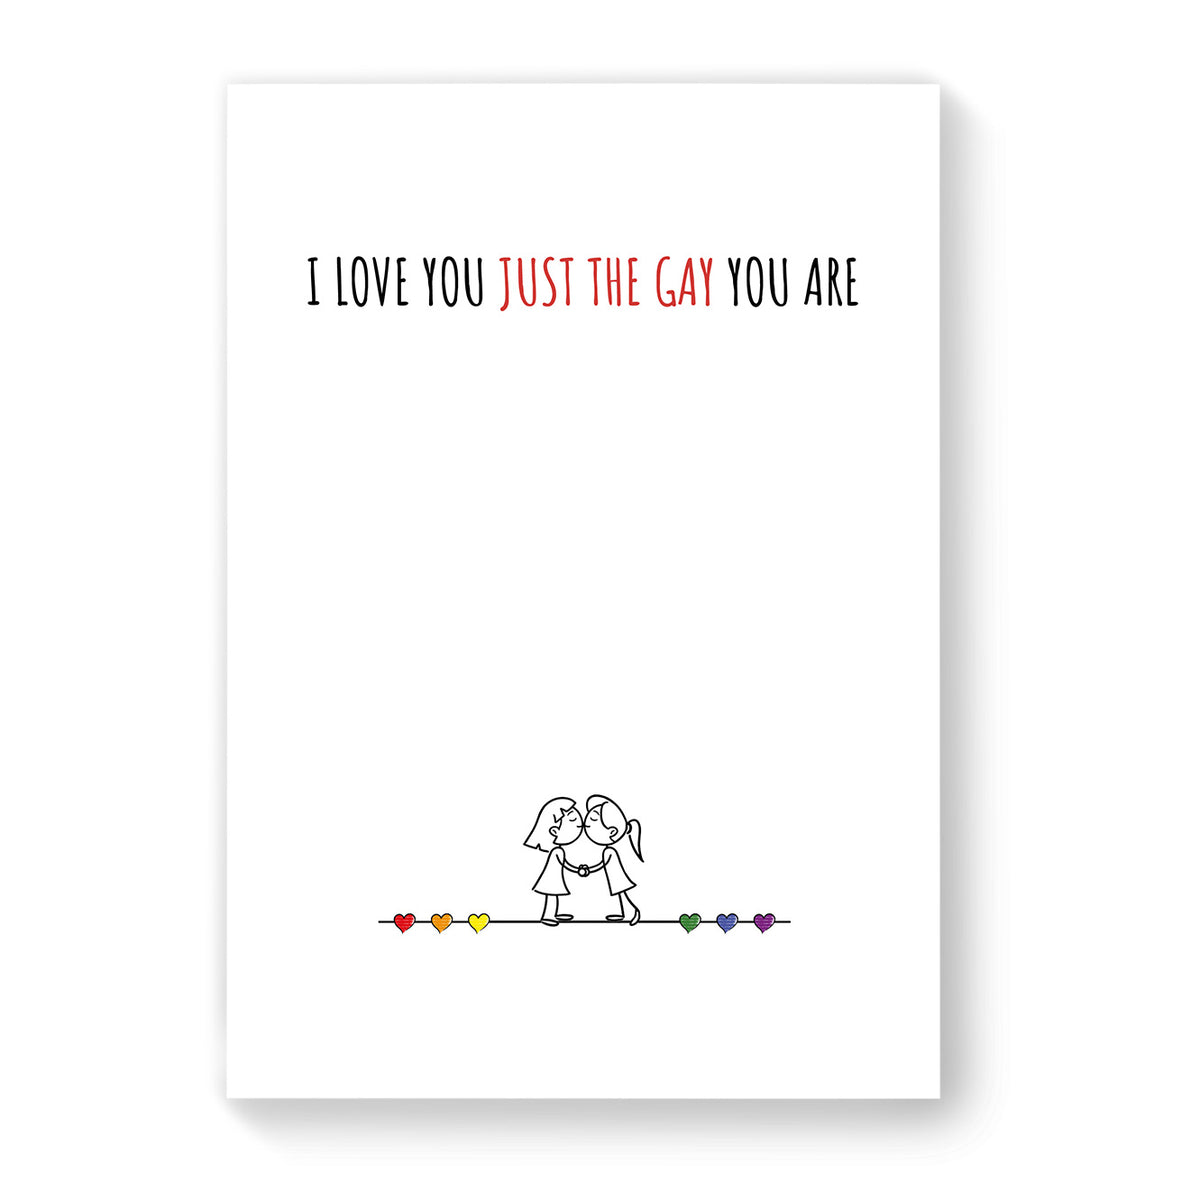 I love you just the gay you are - Lesbian Gay Couple Card - White Minimalist | Gift